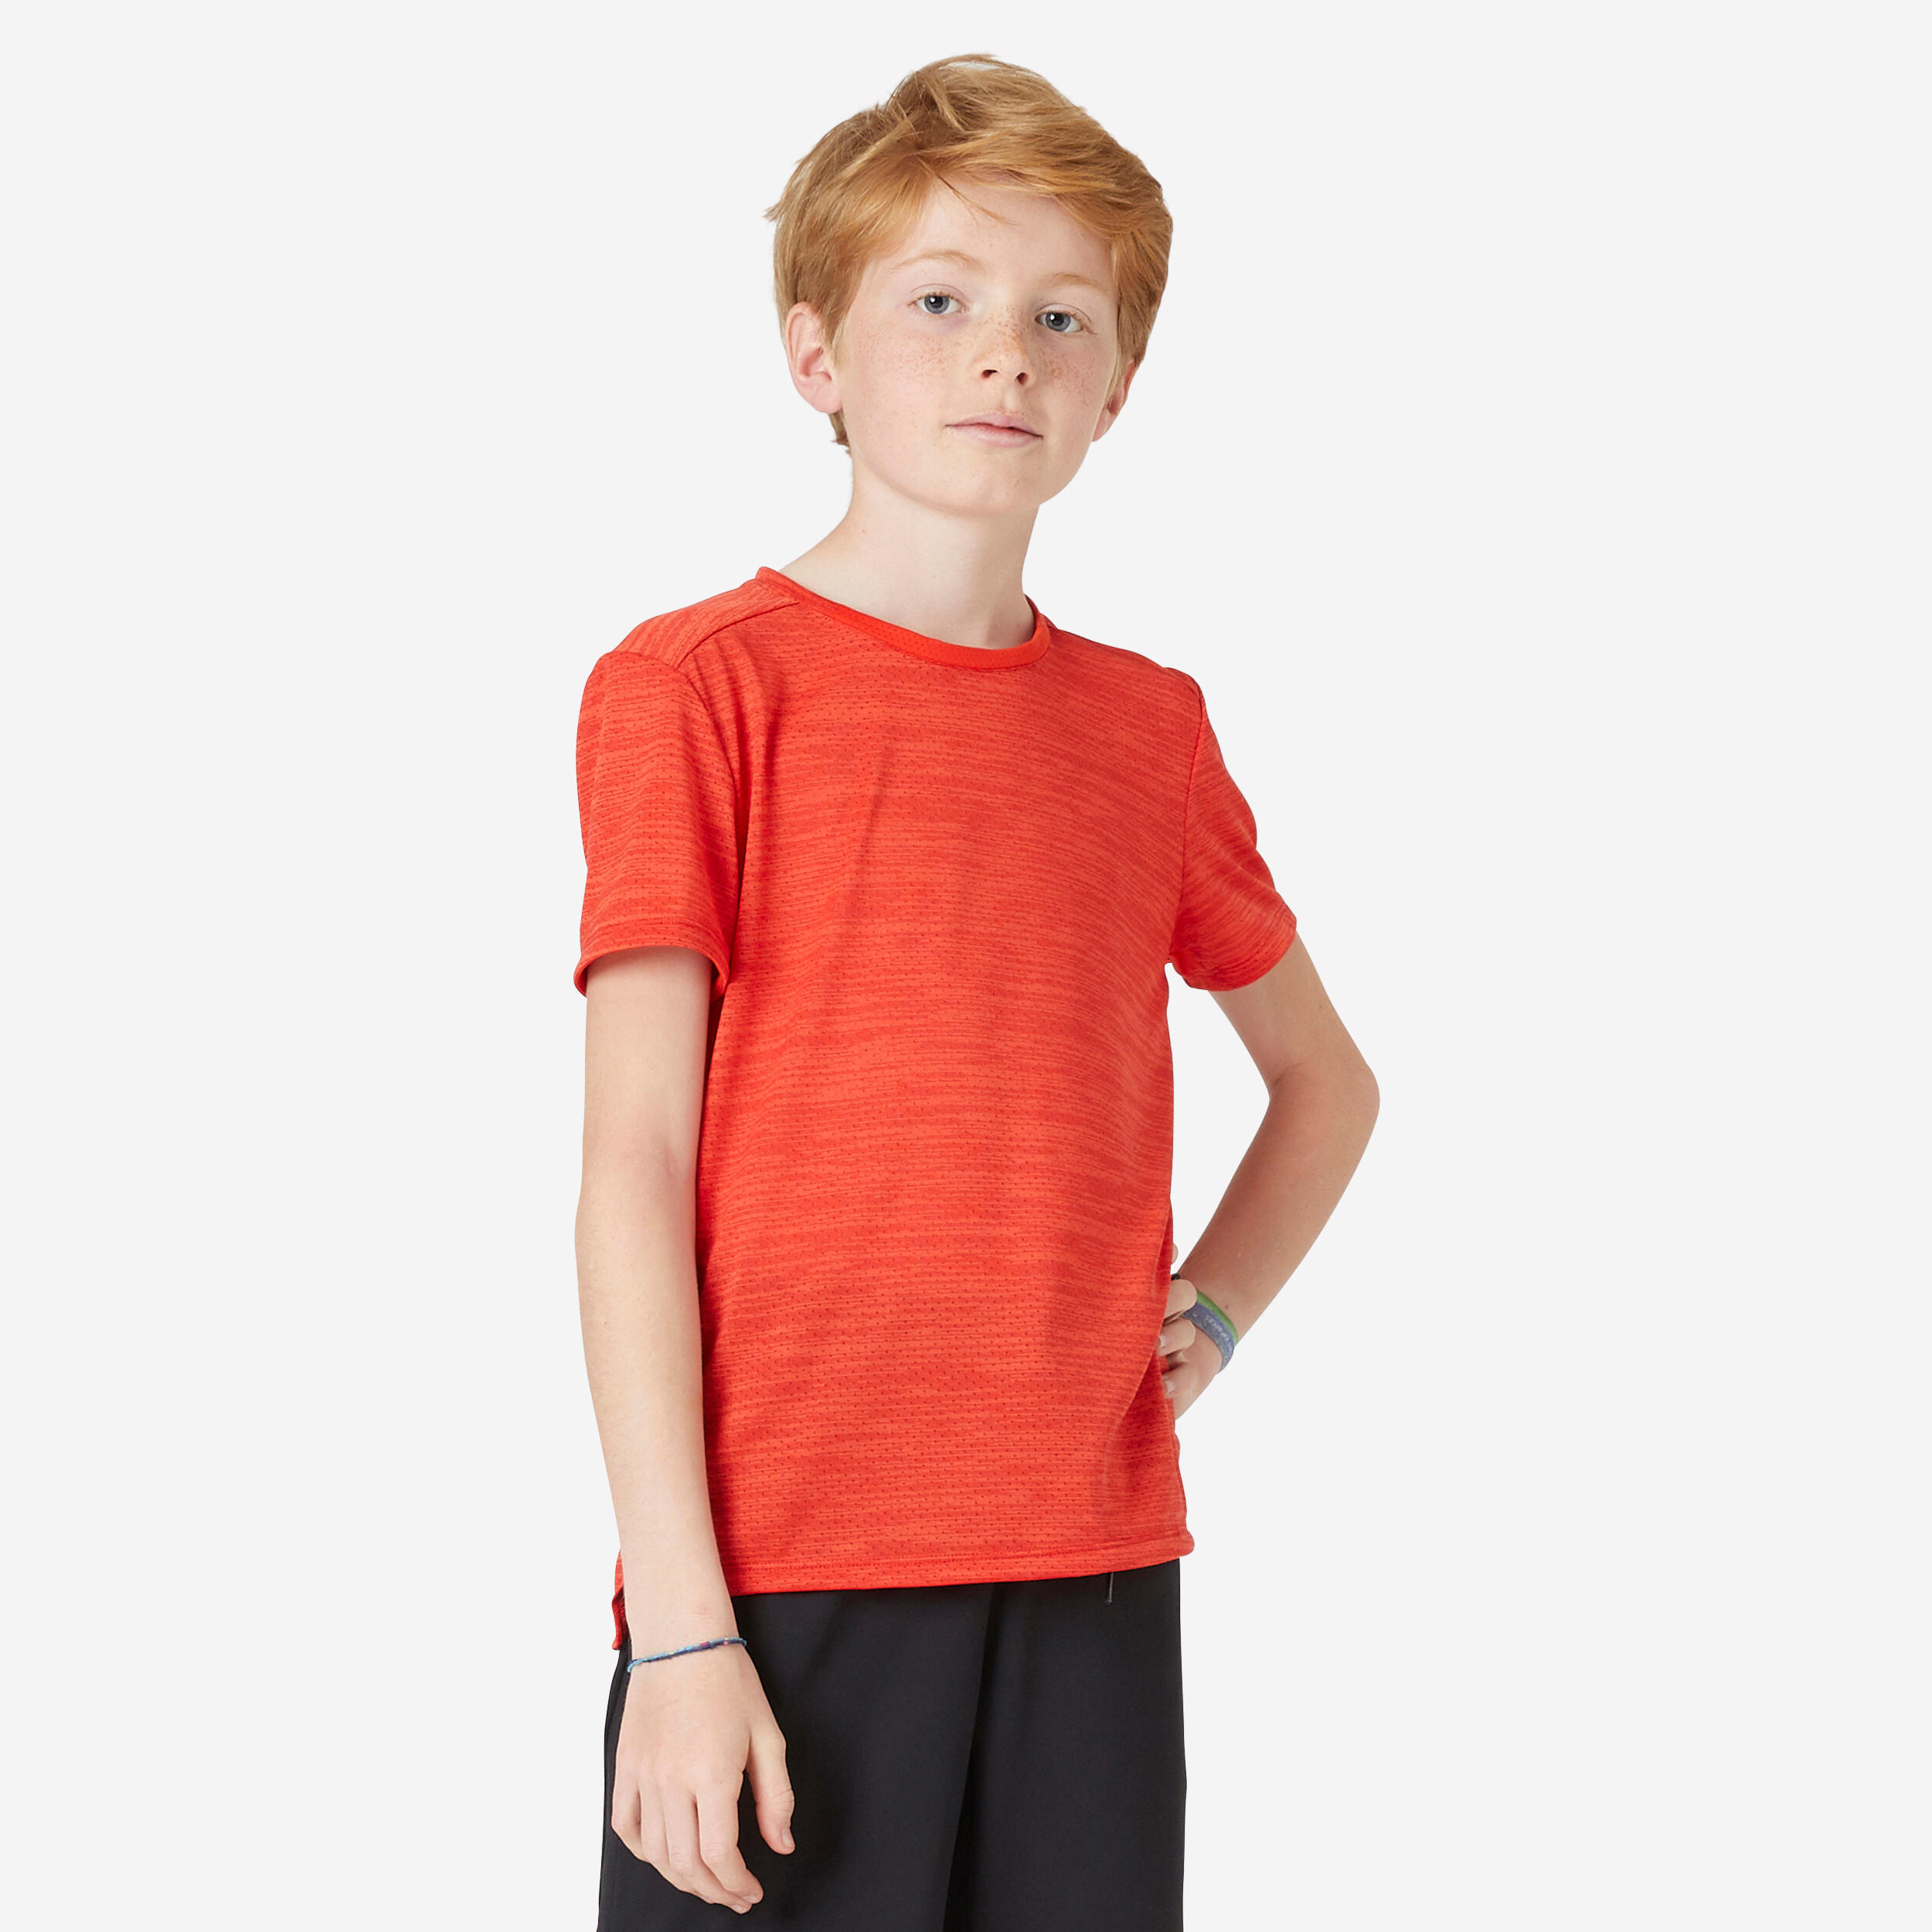 DOMYOS Kids' Synthetic Breathable T-Shirt S500 - Red